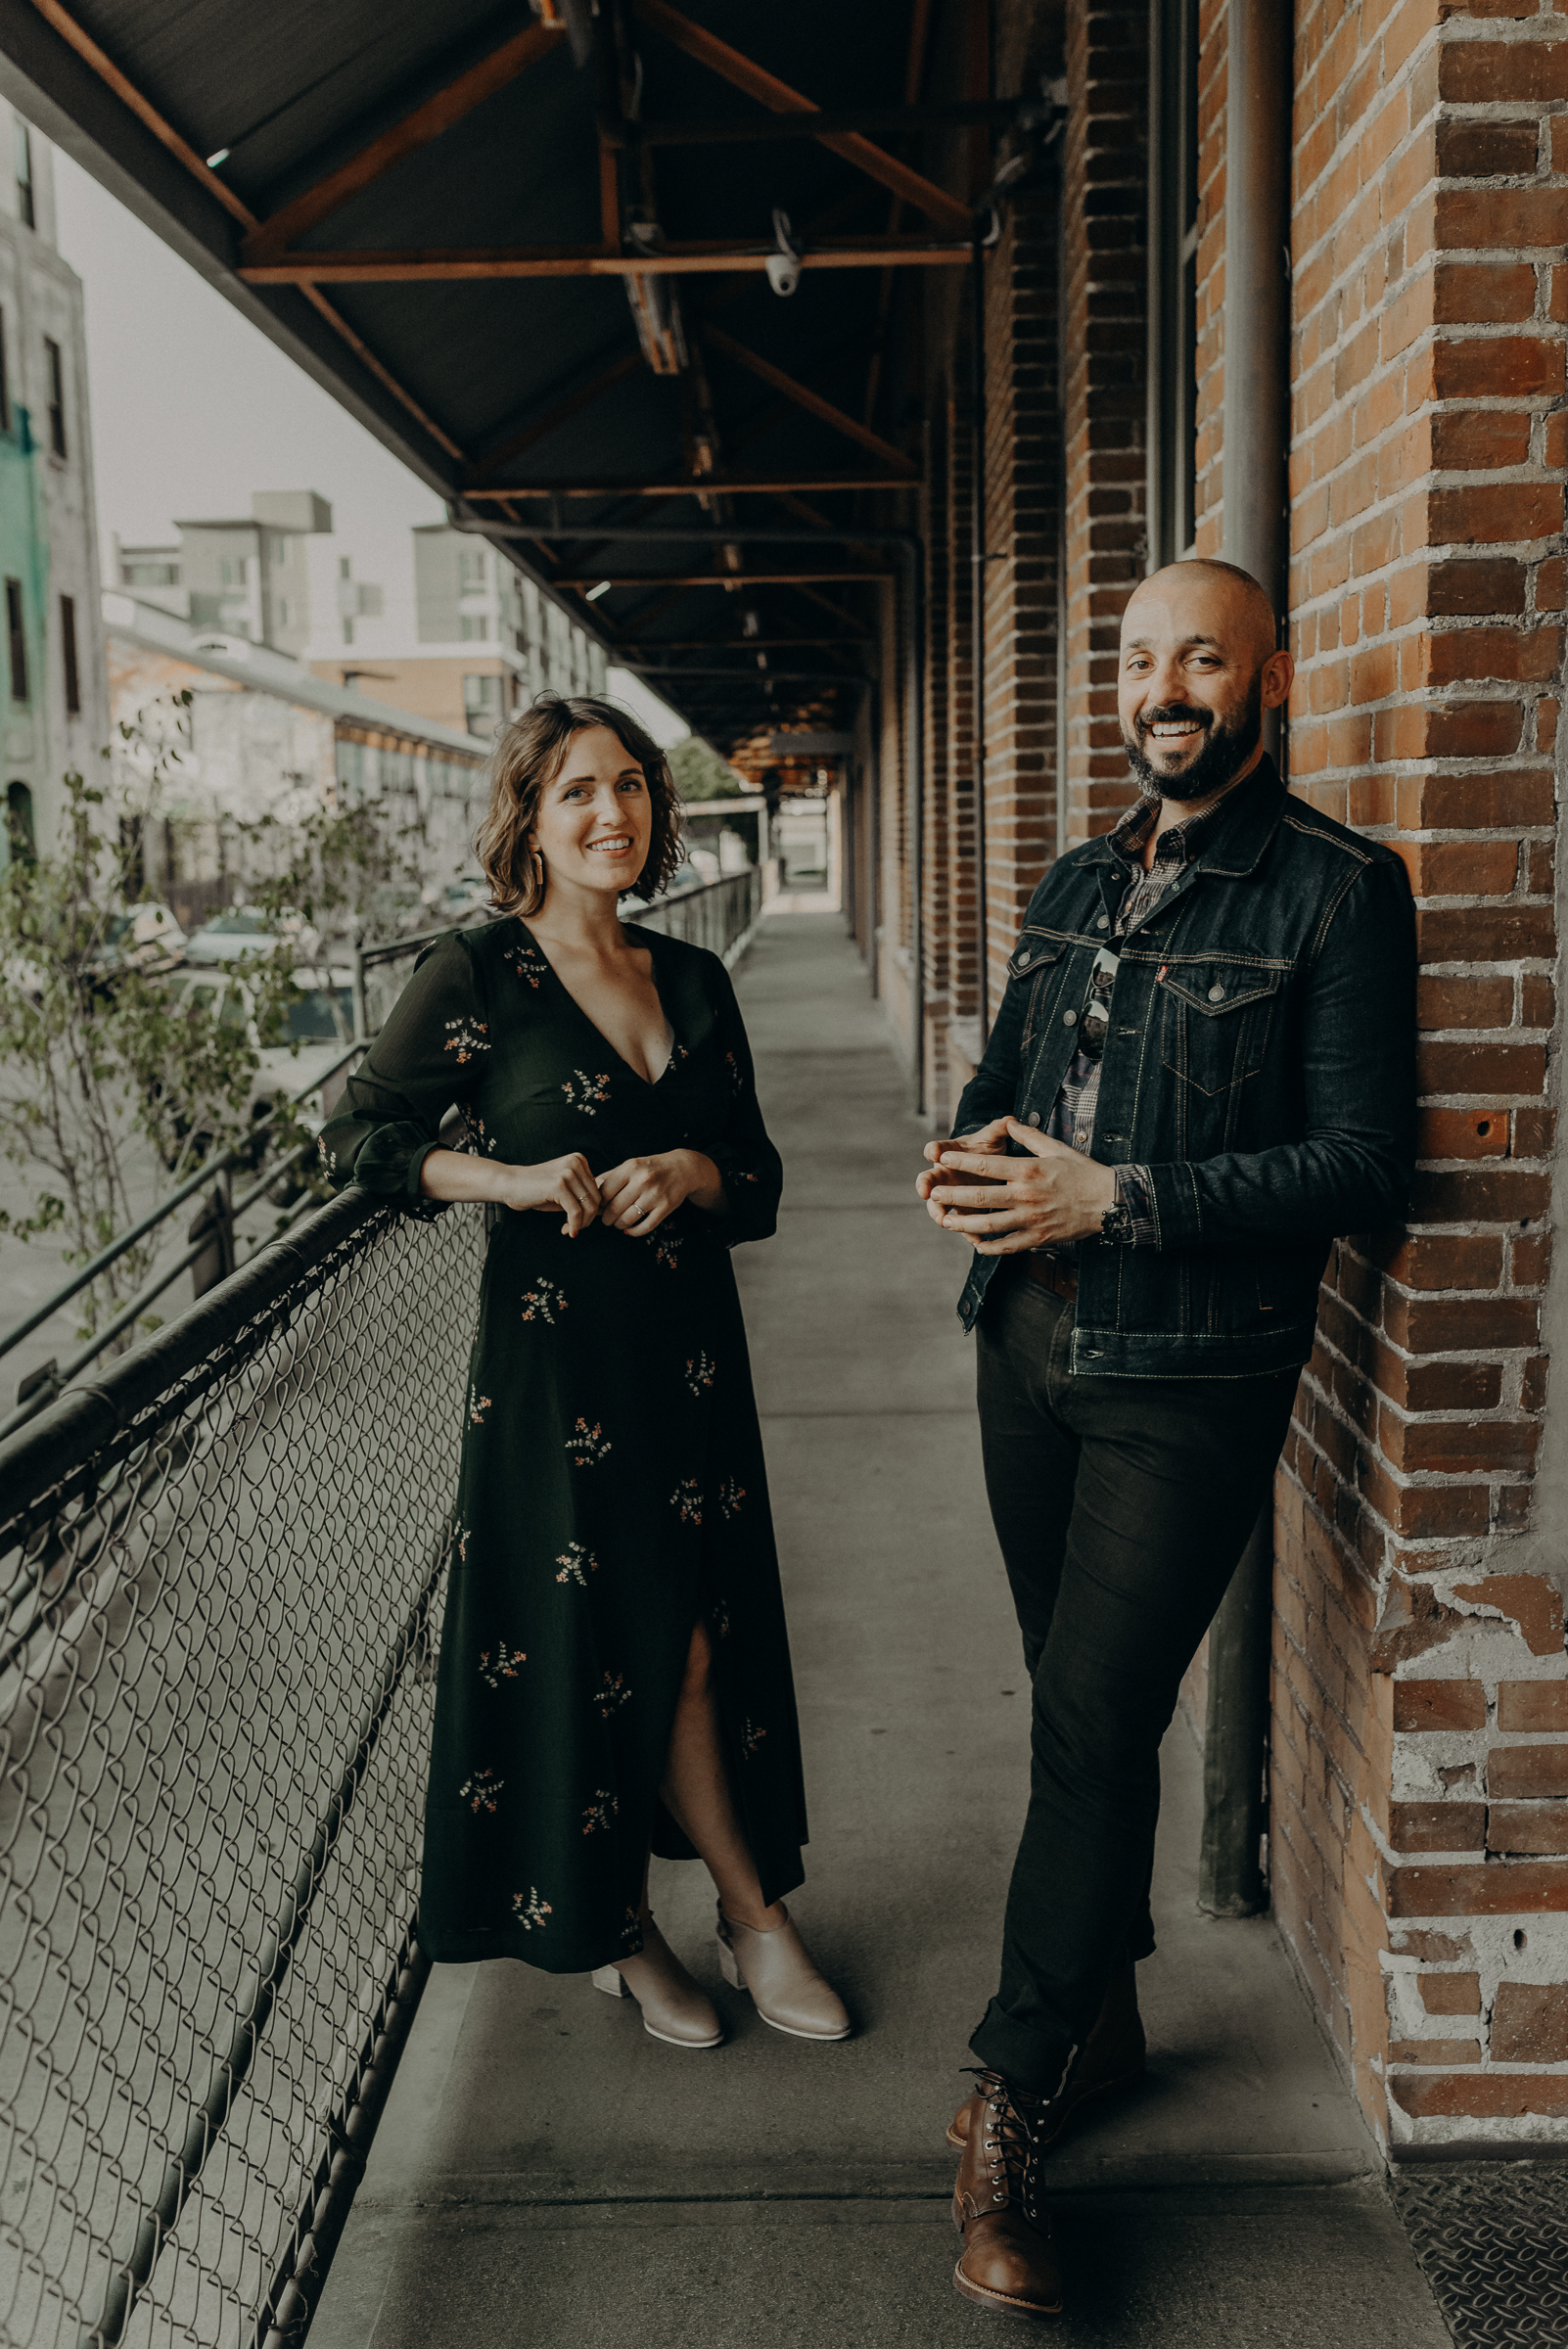 Isaiah + Taylor Photography - Downtown Los Angeles Arts District Engagement03.jpg